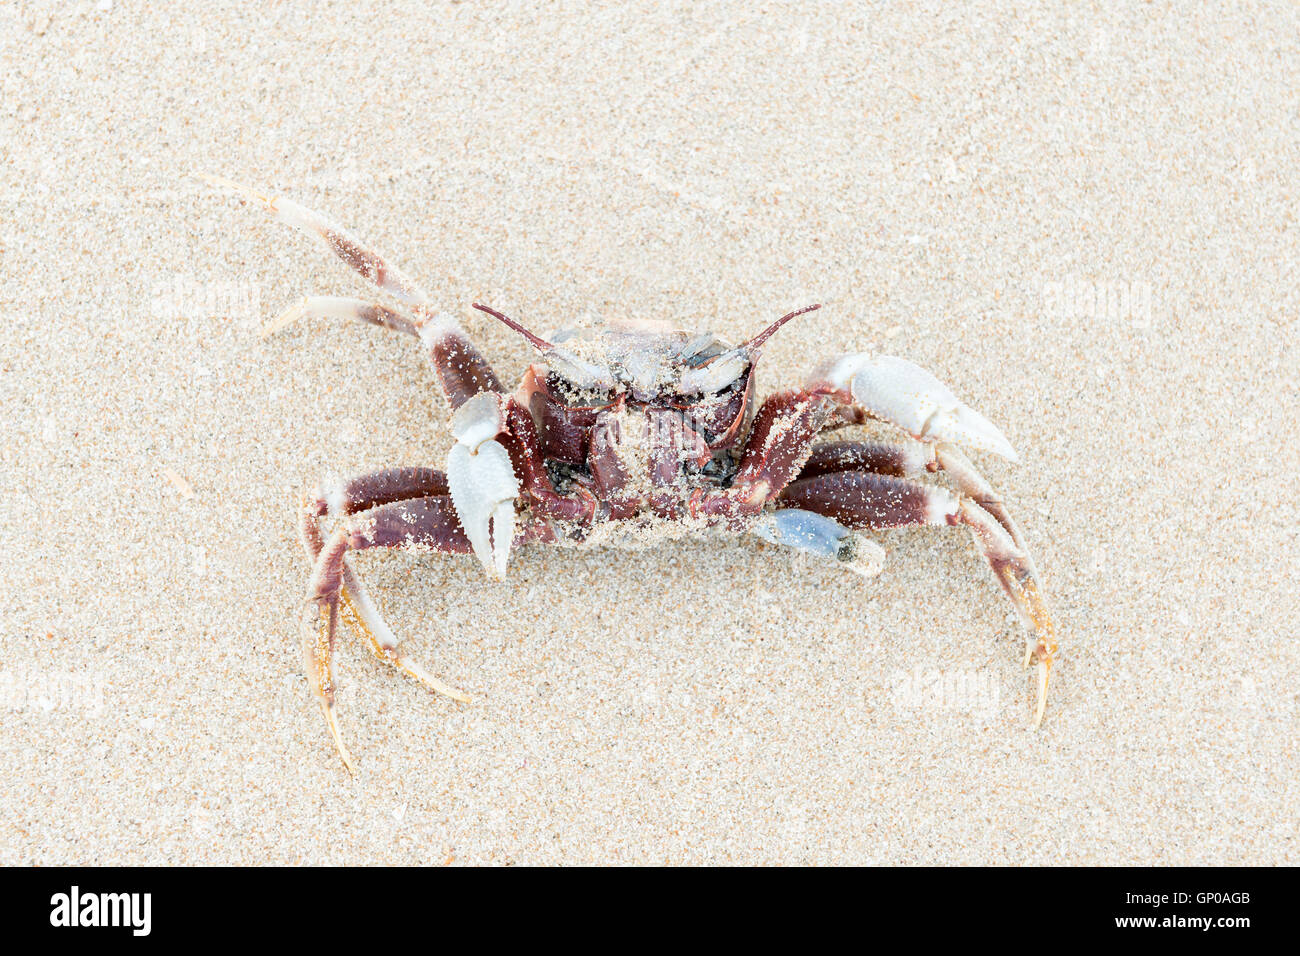 dead shore crab upside down on the sand Stock Photo